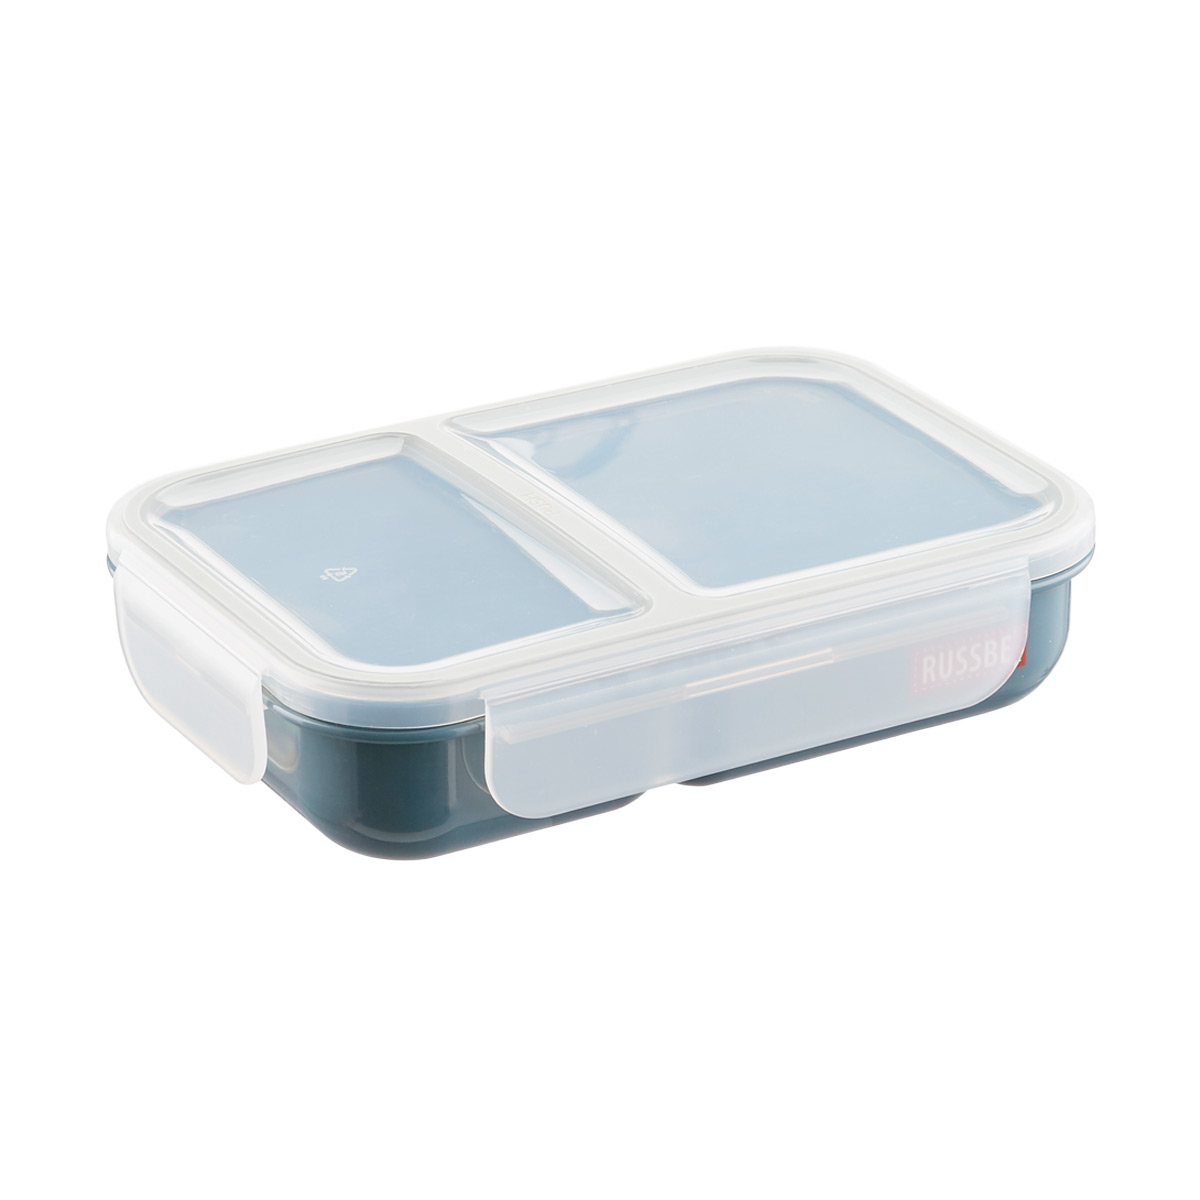 Kids BentoBox Containers ONLY $2.20 each!